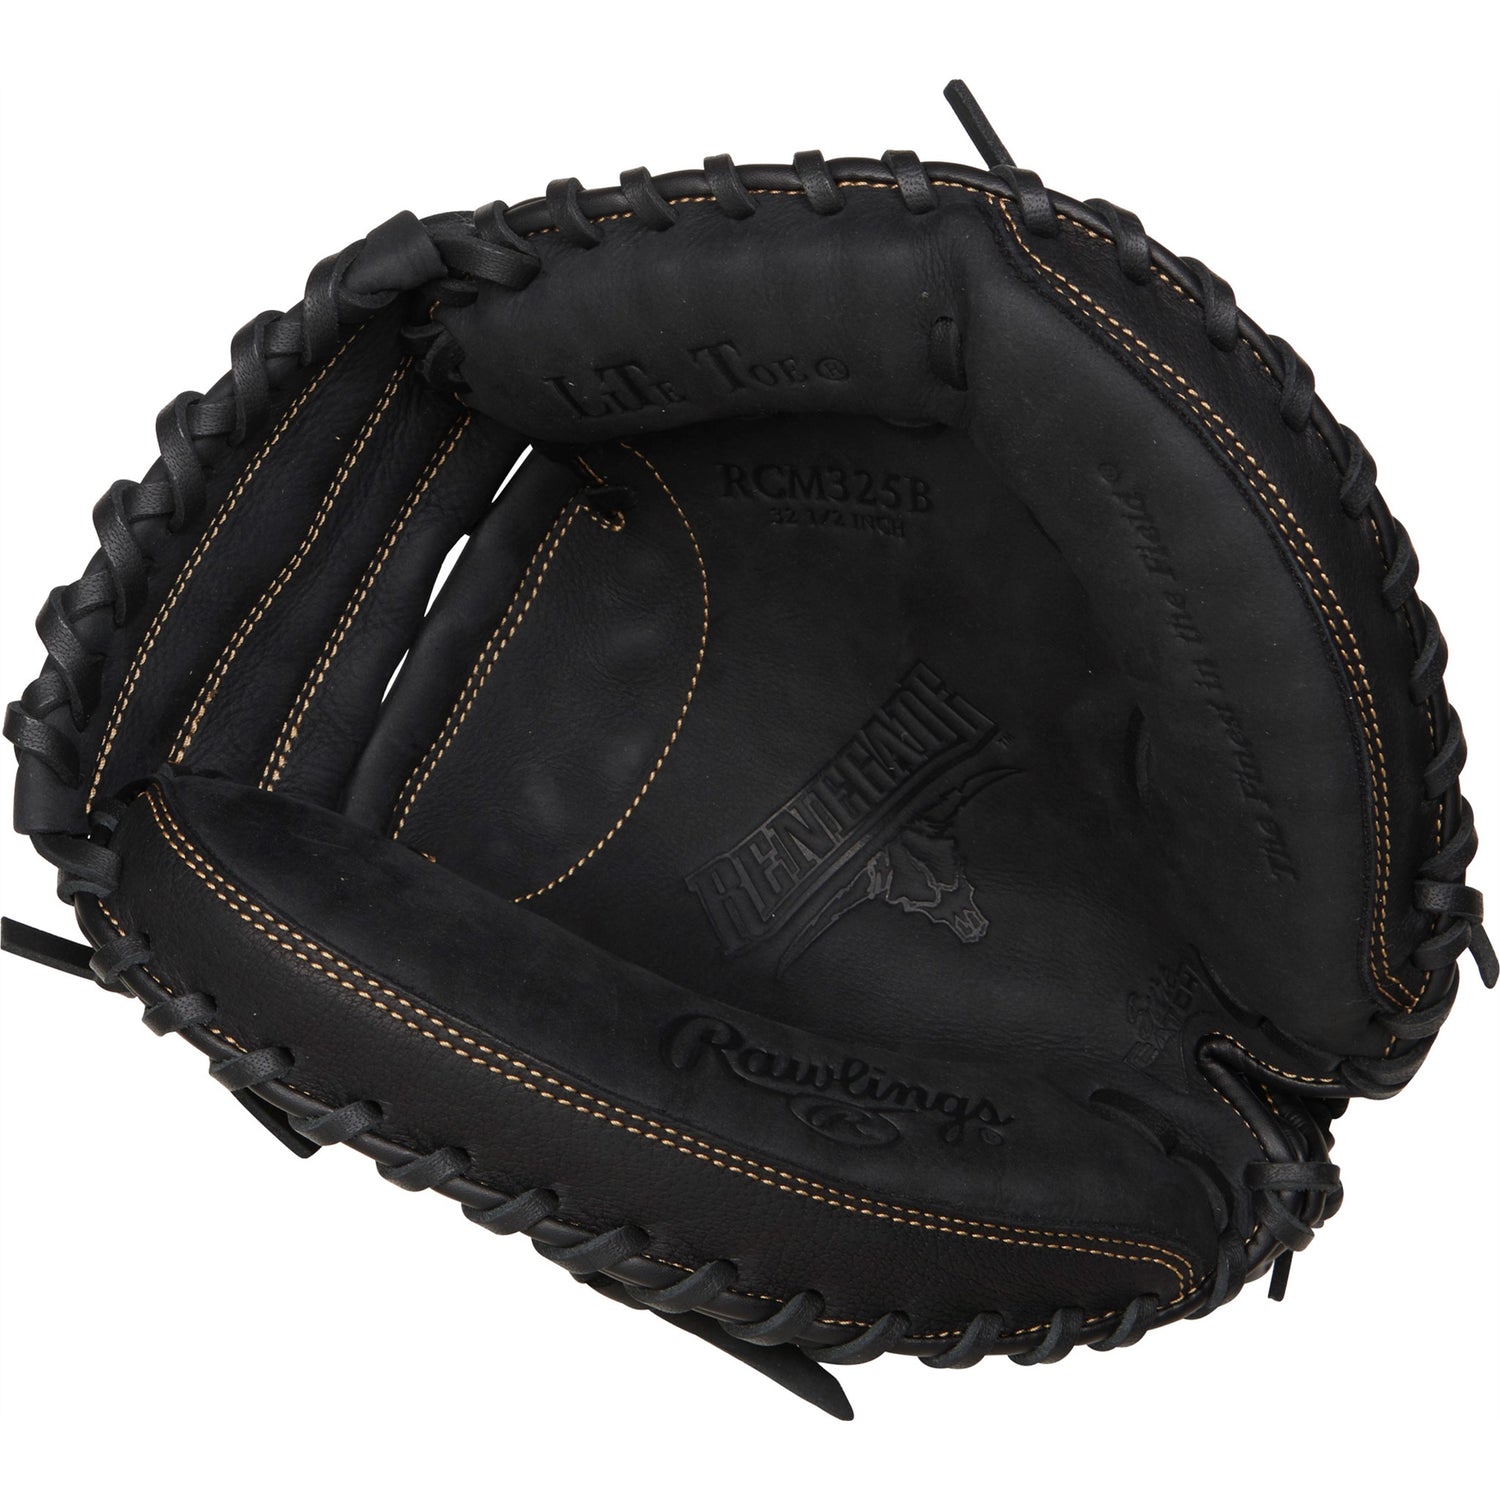 Rawlings (Over £70)